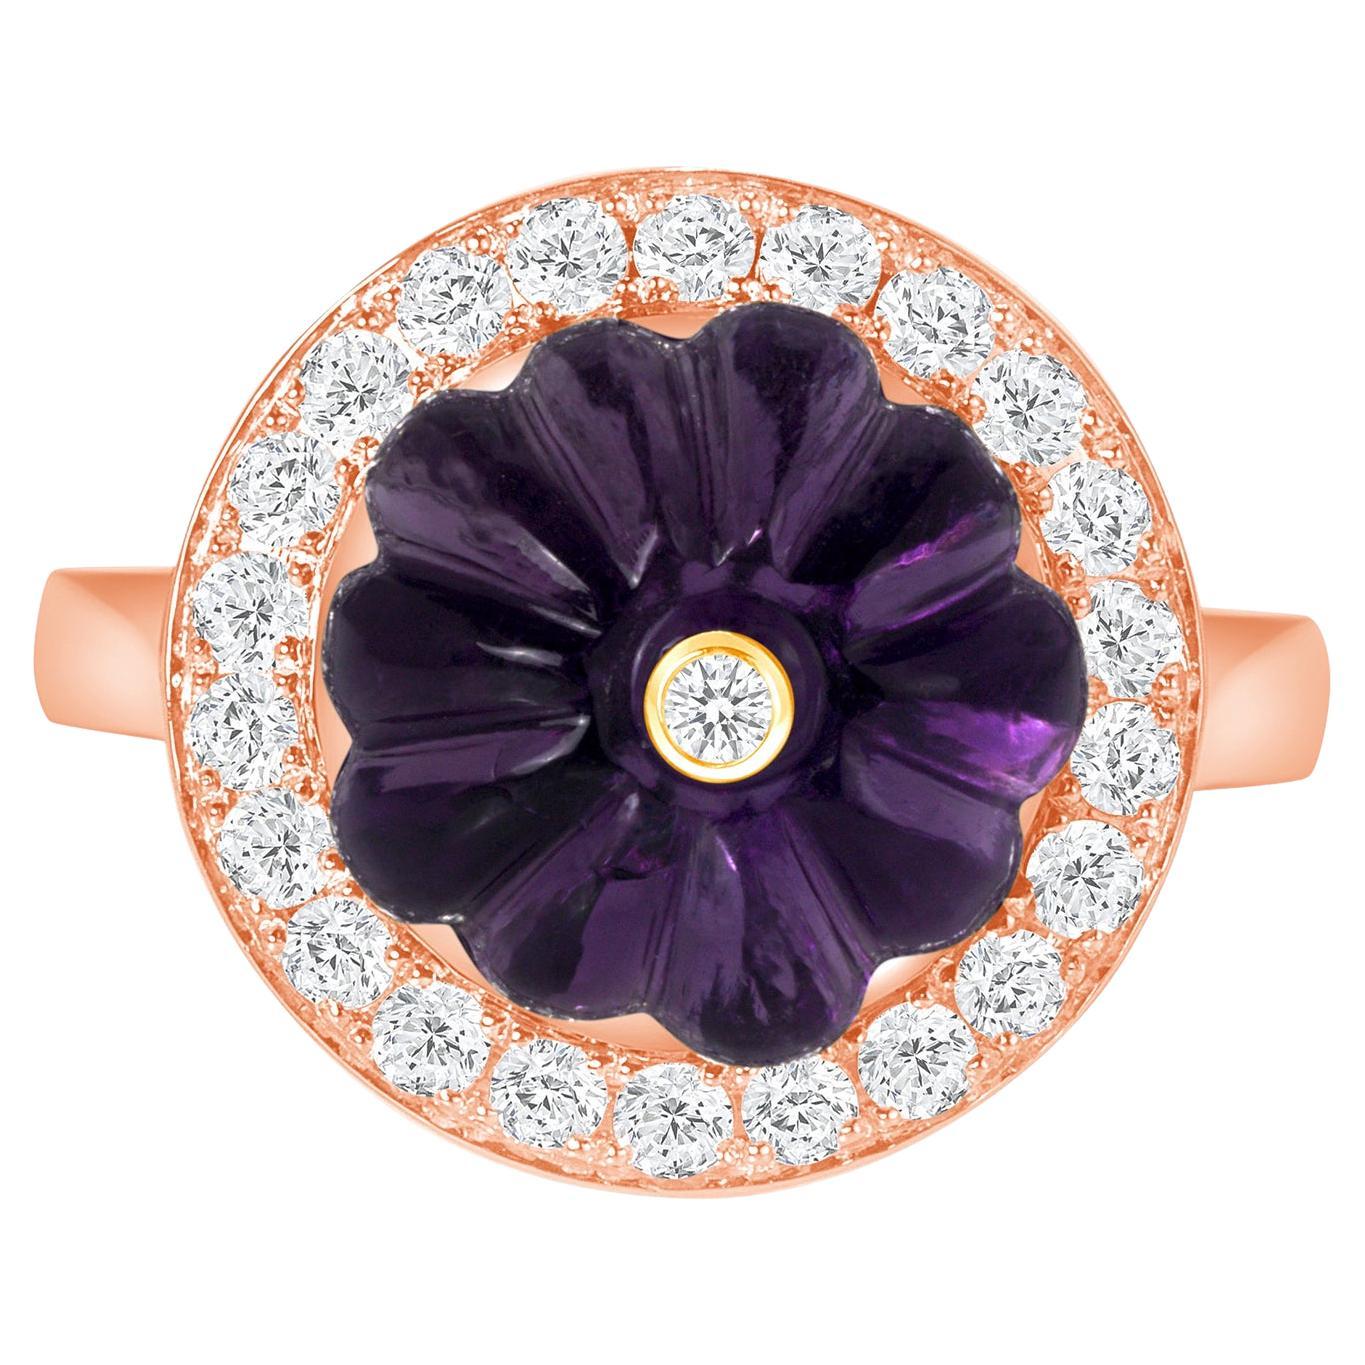 14K Rose Gold Lux Art Deco Cocktail Diamond & Hand Carved Amethyst Ring 